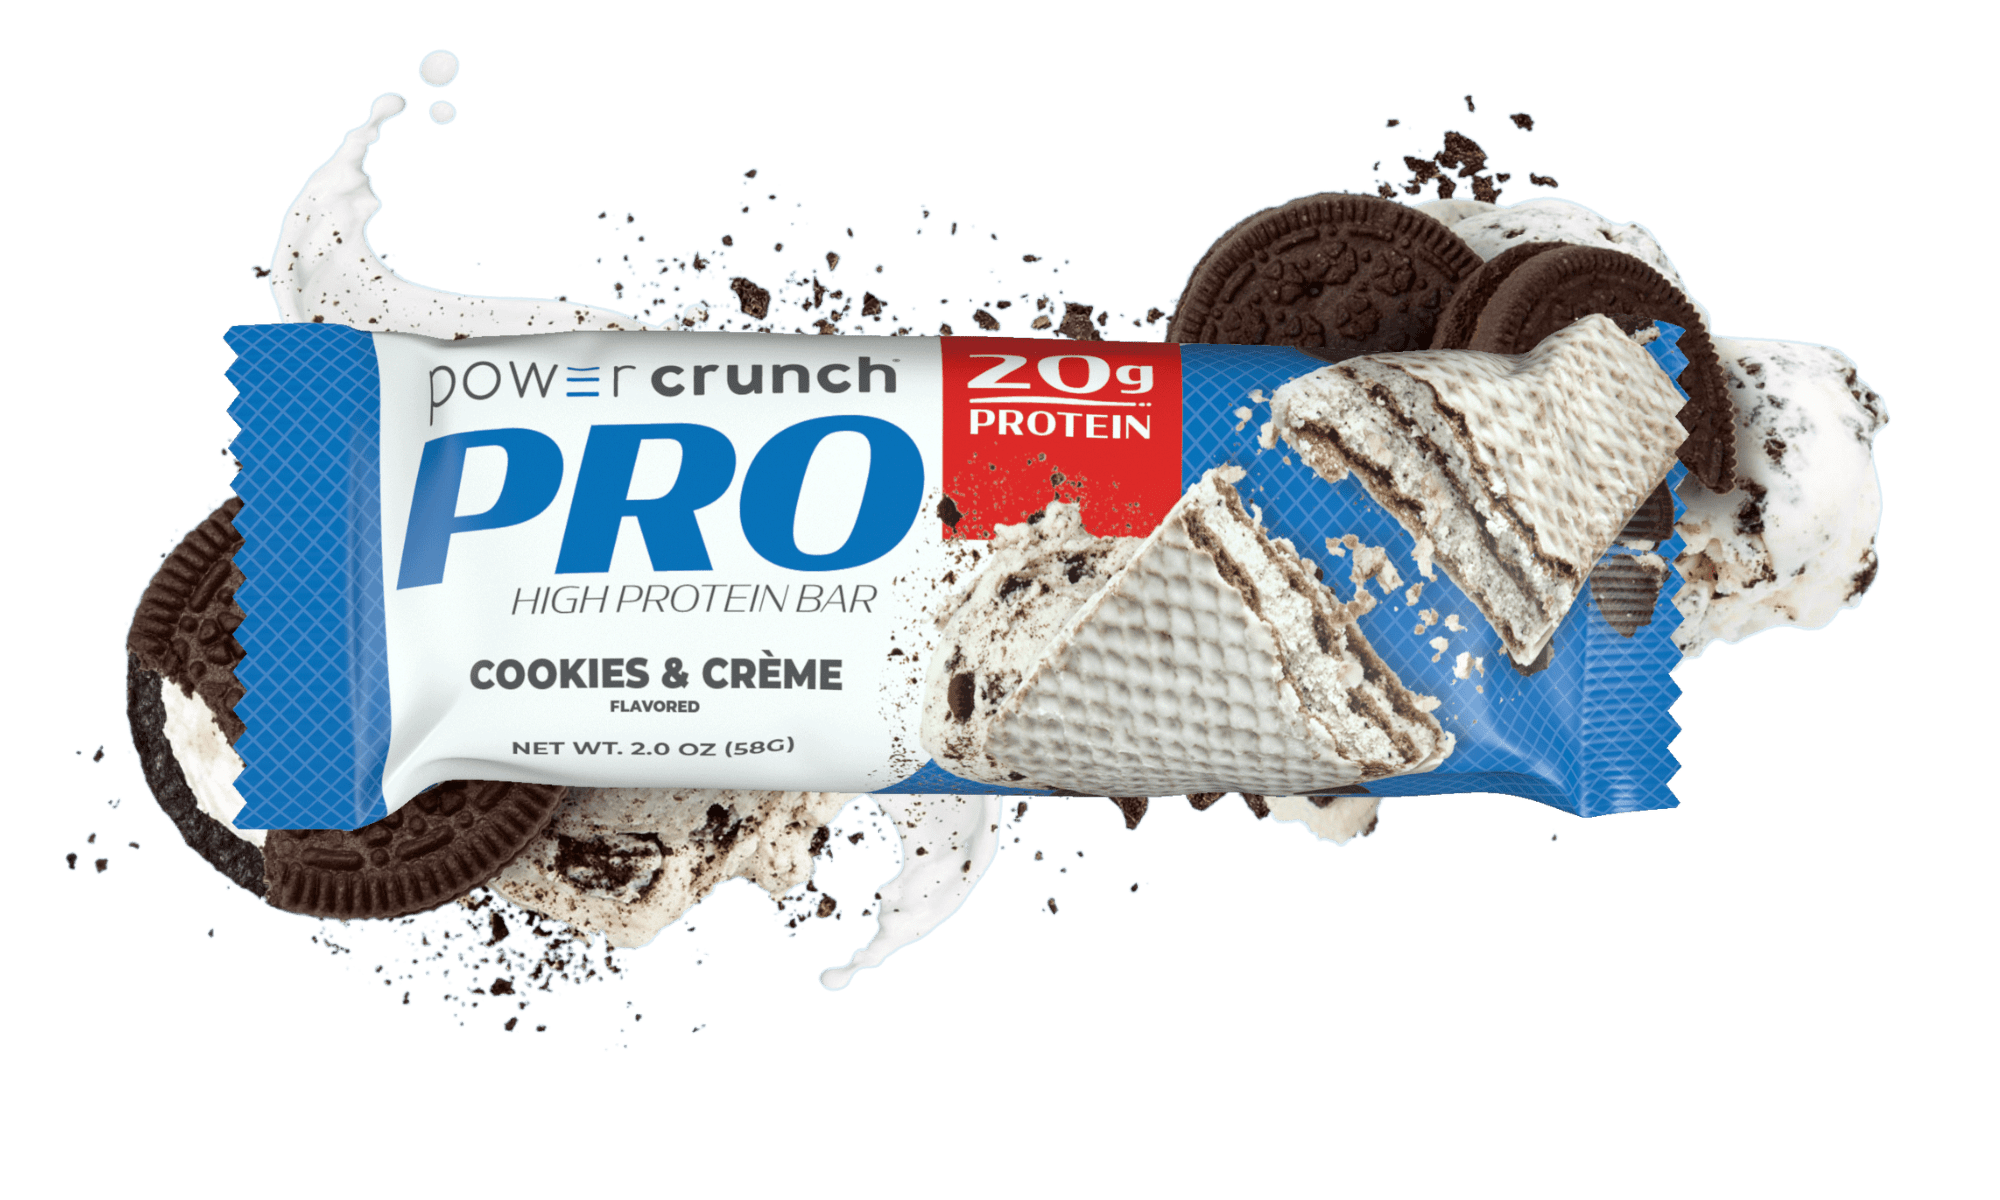 Power Crunch PRO Cookies and Cream 20g protein bars pictured with Cookies and Cream flavor explosion